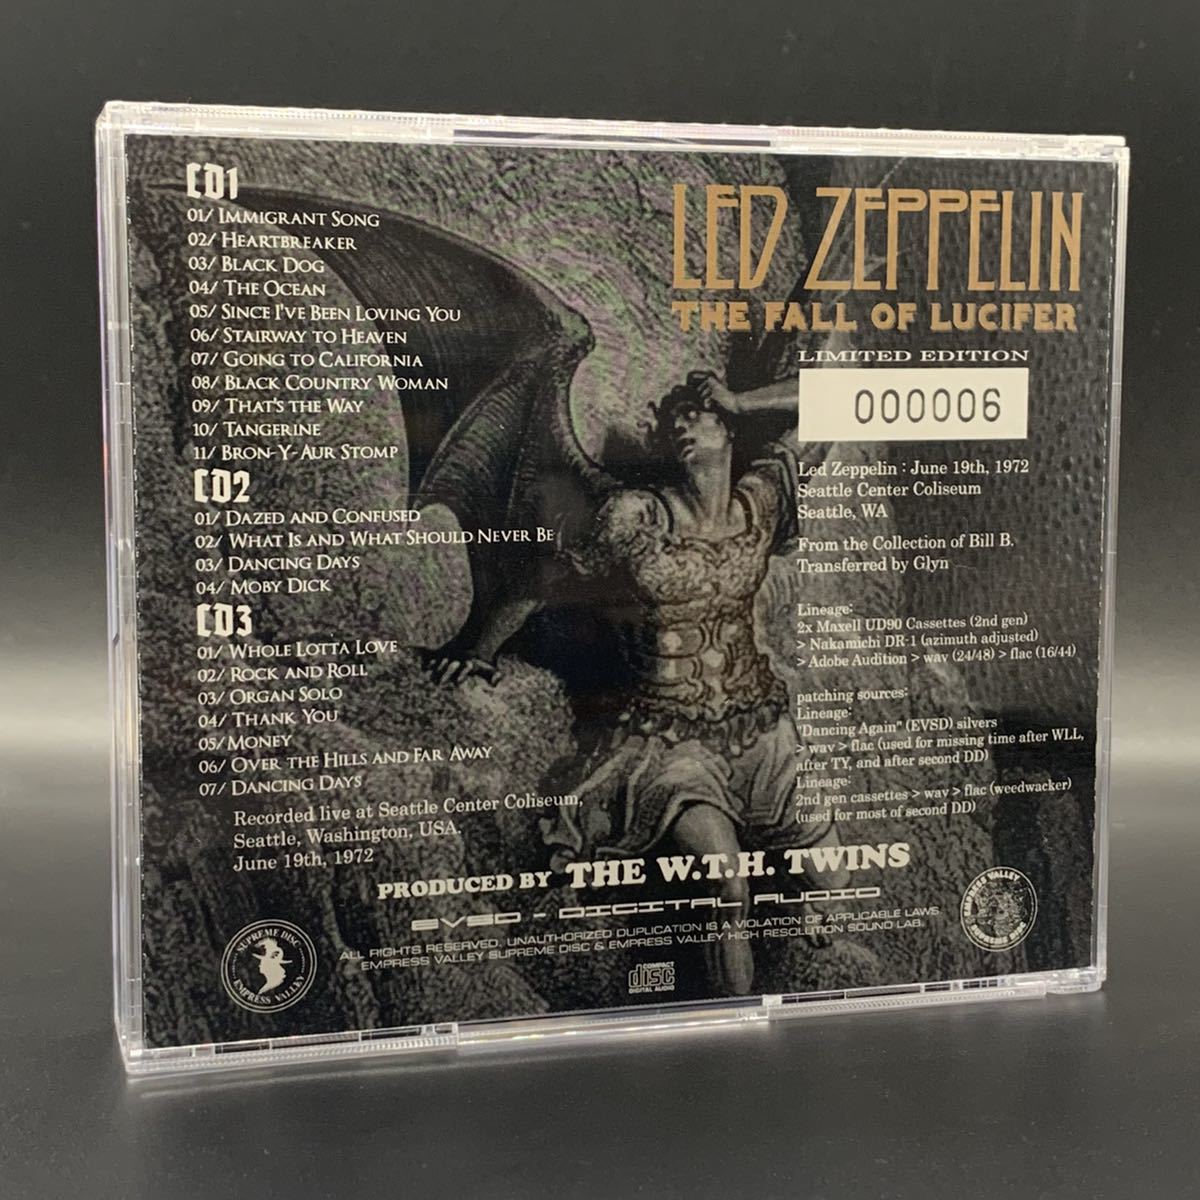 LED ZEPPELIN : THE FALL OF LUCIFER 「堕天使」3CD EMPRESS VALLEY SUPREME DISK 100SET 限定品 1972 Seattle